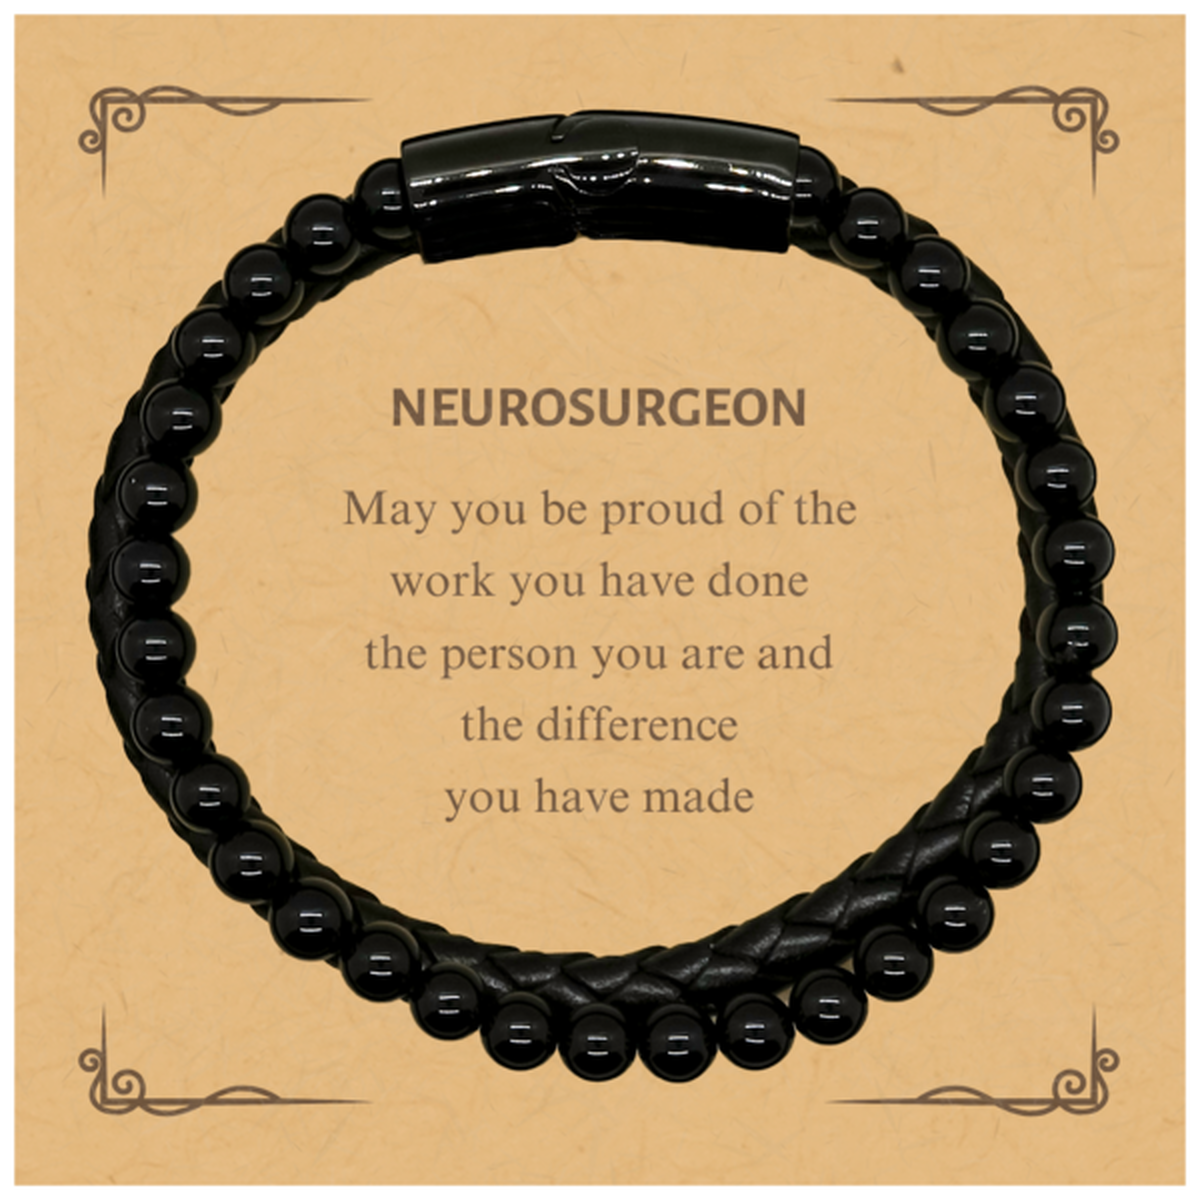 Neurosurgeon May you be proud of the work you have done, Retirement Neurosurgeon Stone Leather Bracelets for Colleague Appreciation Gifts Amazing for Neurosurgeon